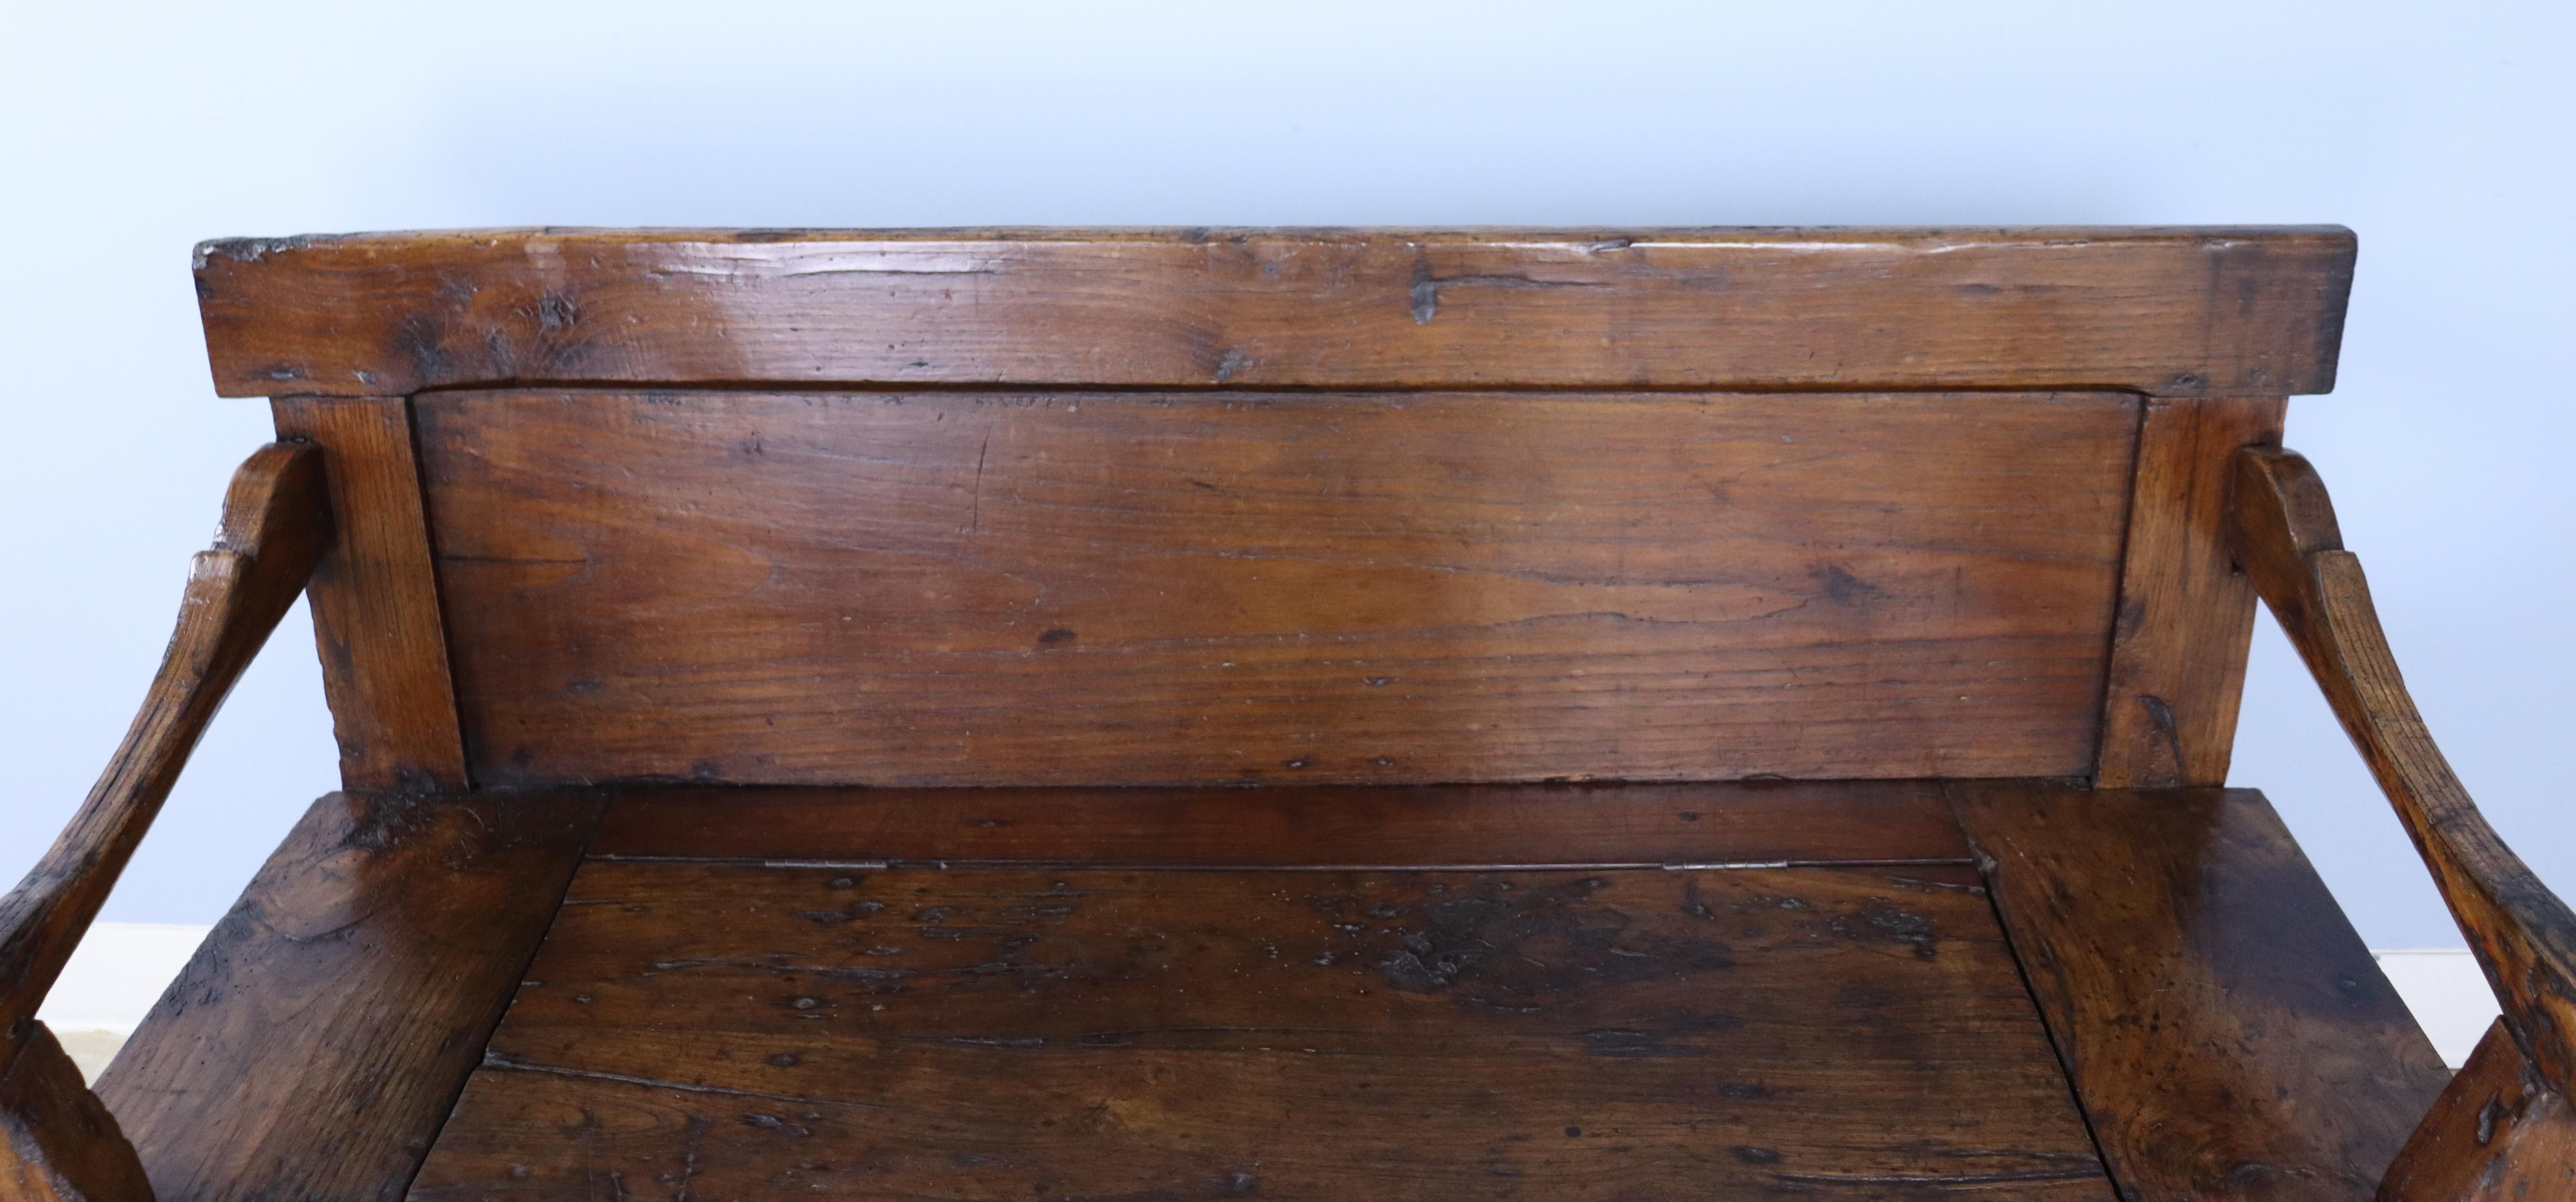 Patinated Antique Chestnut Bench In Good Condition For Sale In Port Chester, NY